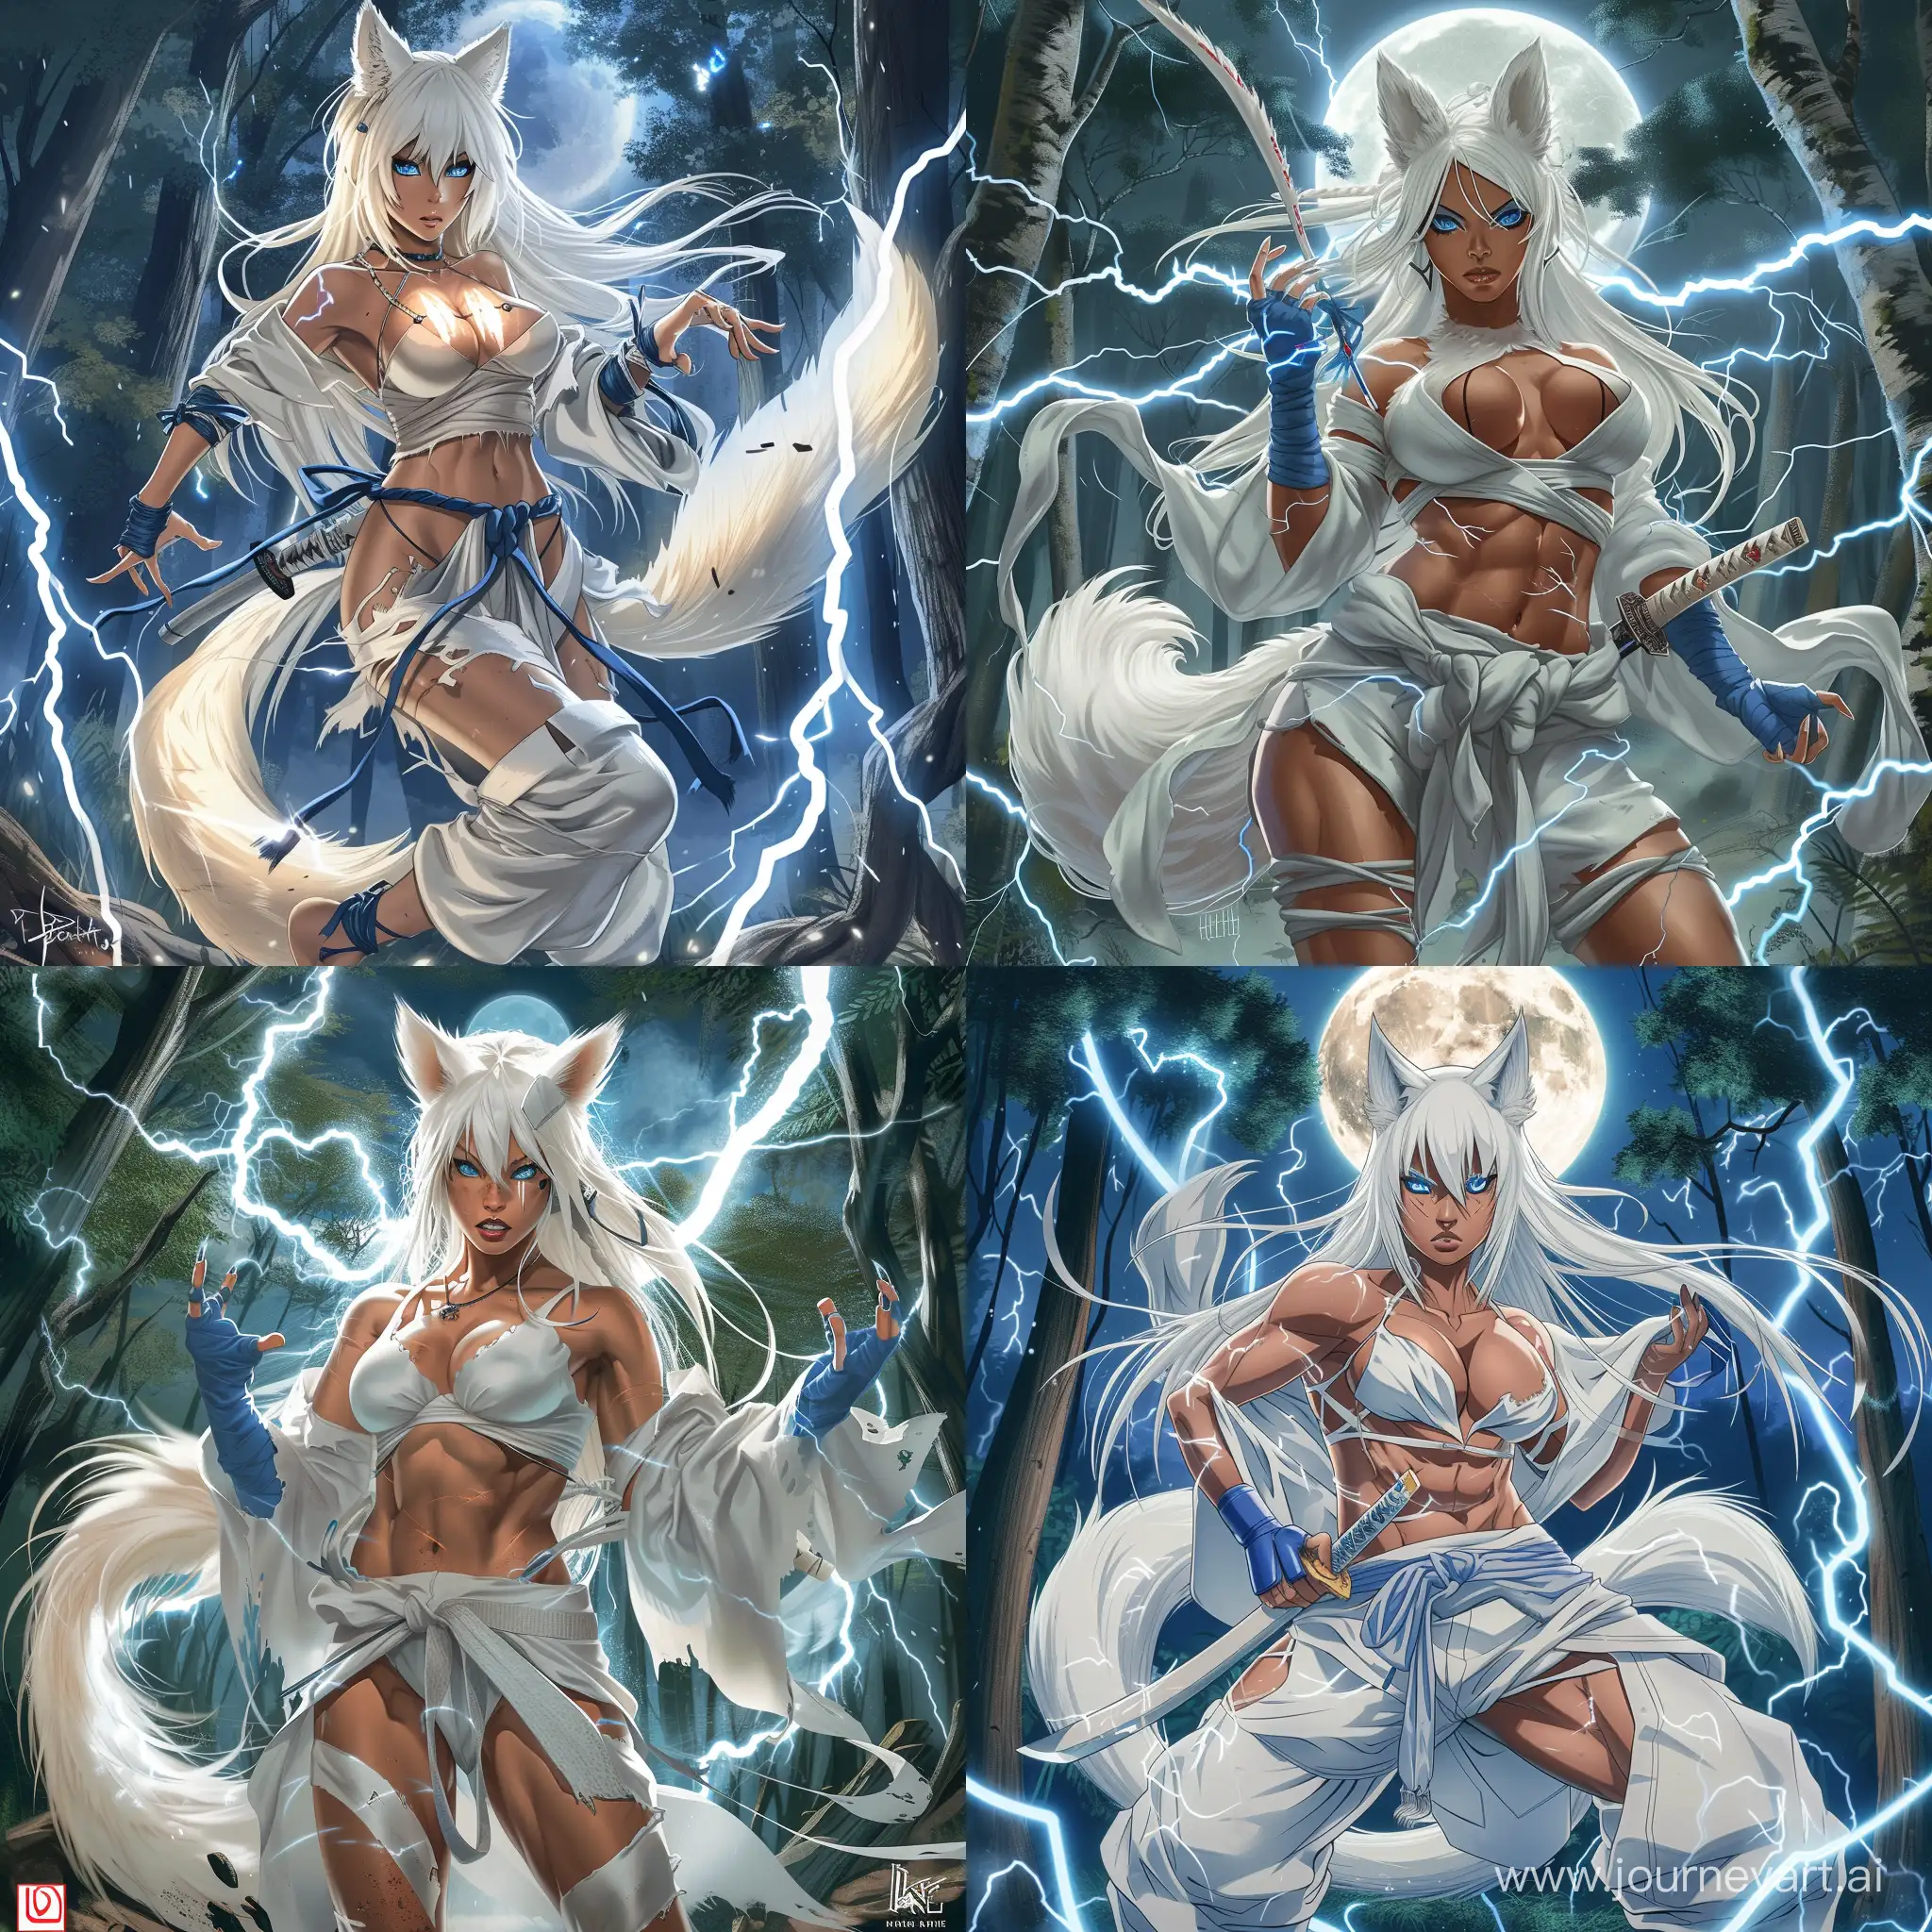 anime-style, full body, athletic, muscular, tan skin, adult, asian woman, long white hair, white fox ears, white fox tail attached to her waist, fierce blue eyes, wearing a white chestwrap, baggy white martial arts pants, white chest binder, holding a katana, dynamic, blue handwraps, blue footwraps, using lightning magic, surrounded by lightning, forest, night, full moon